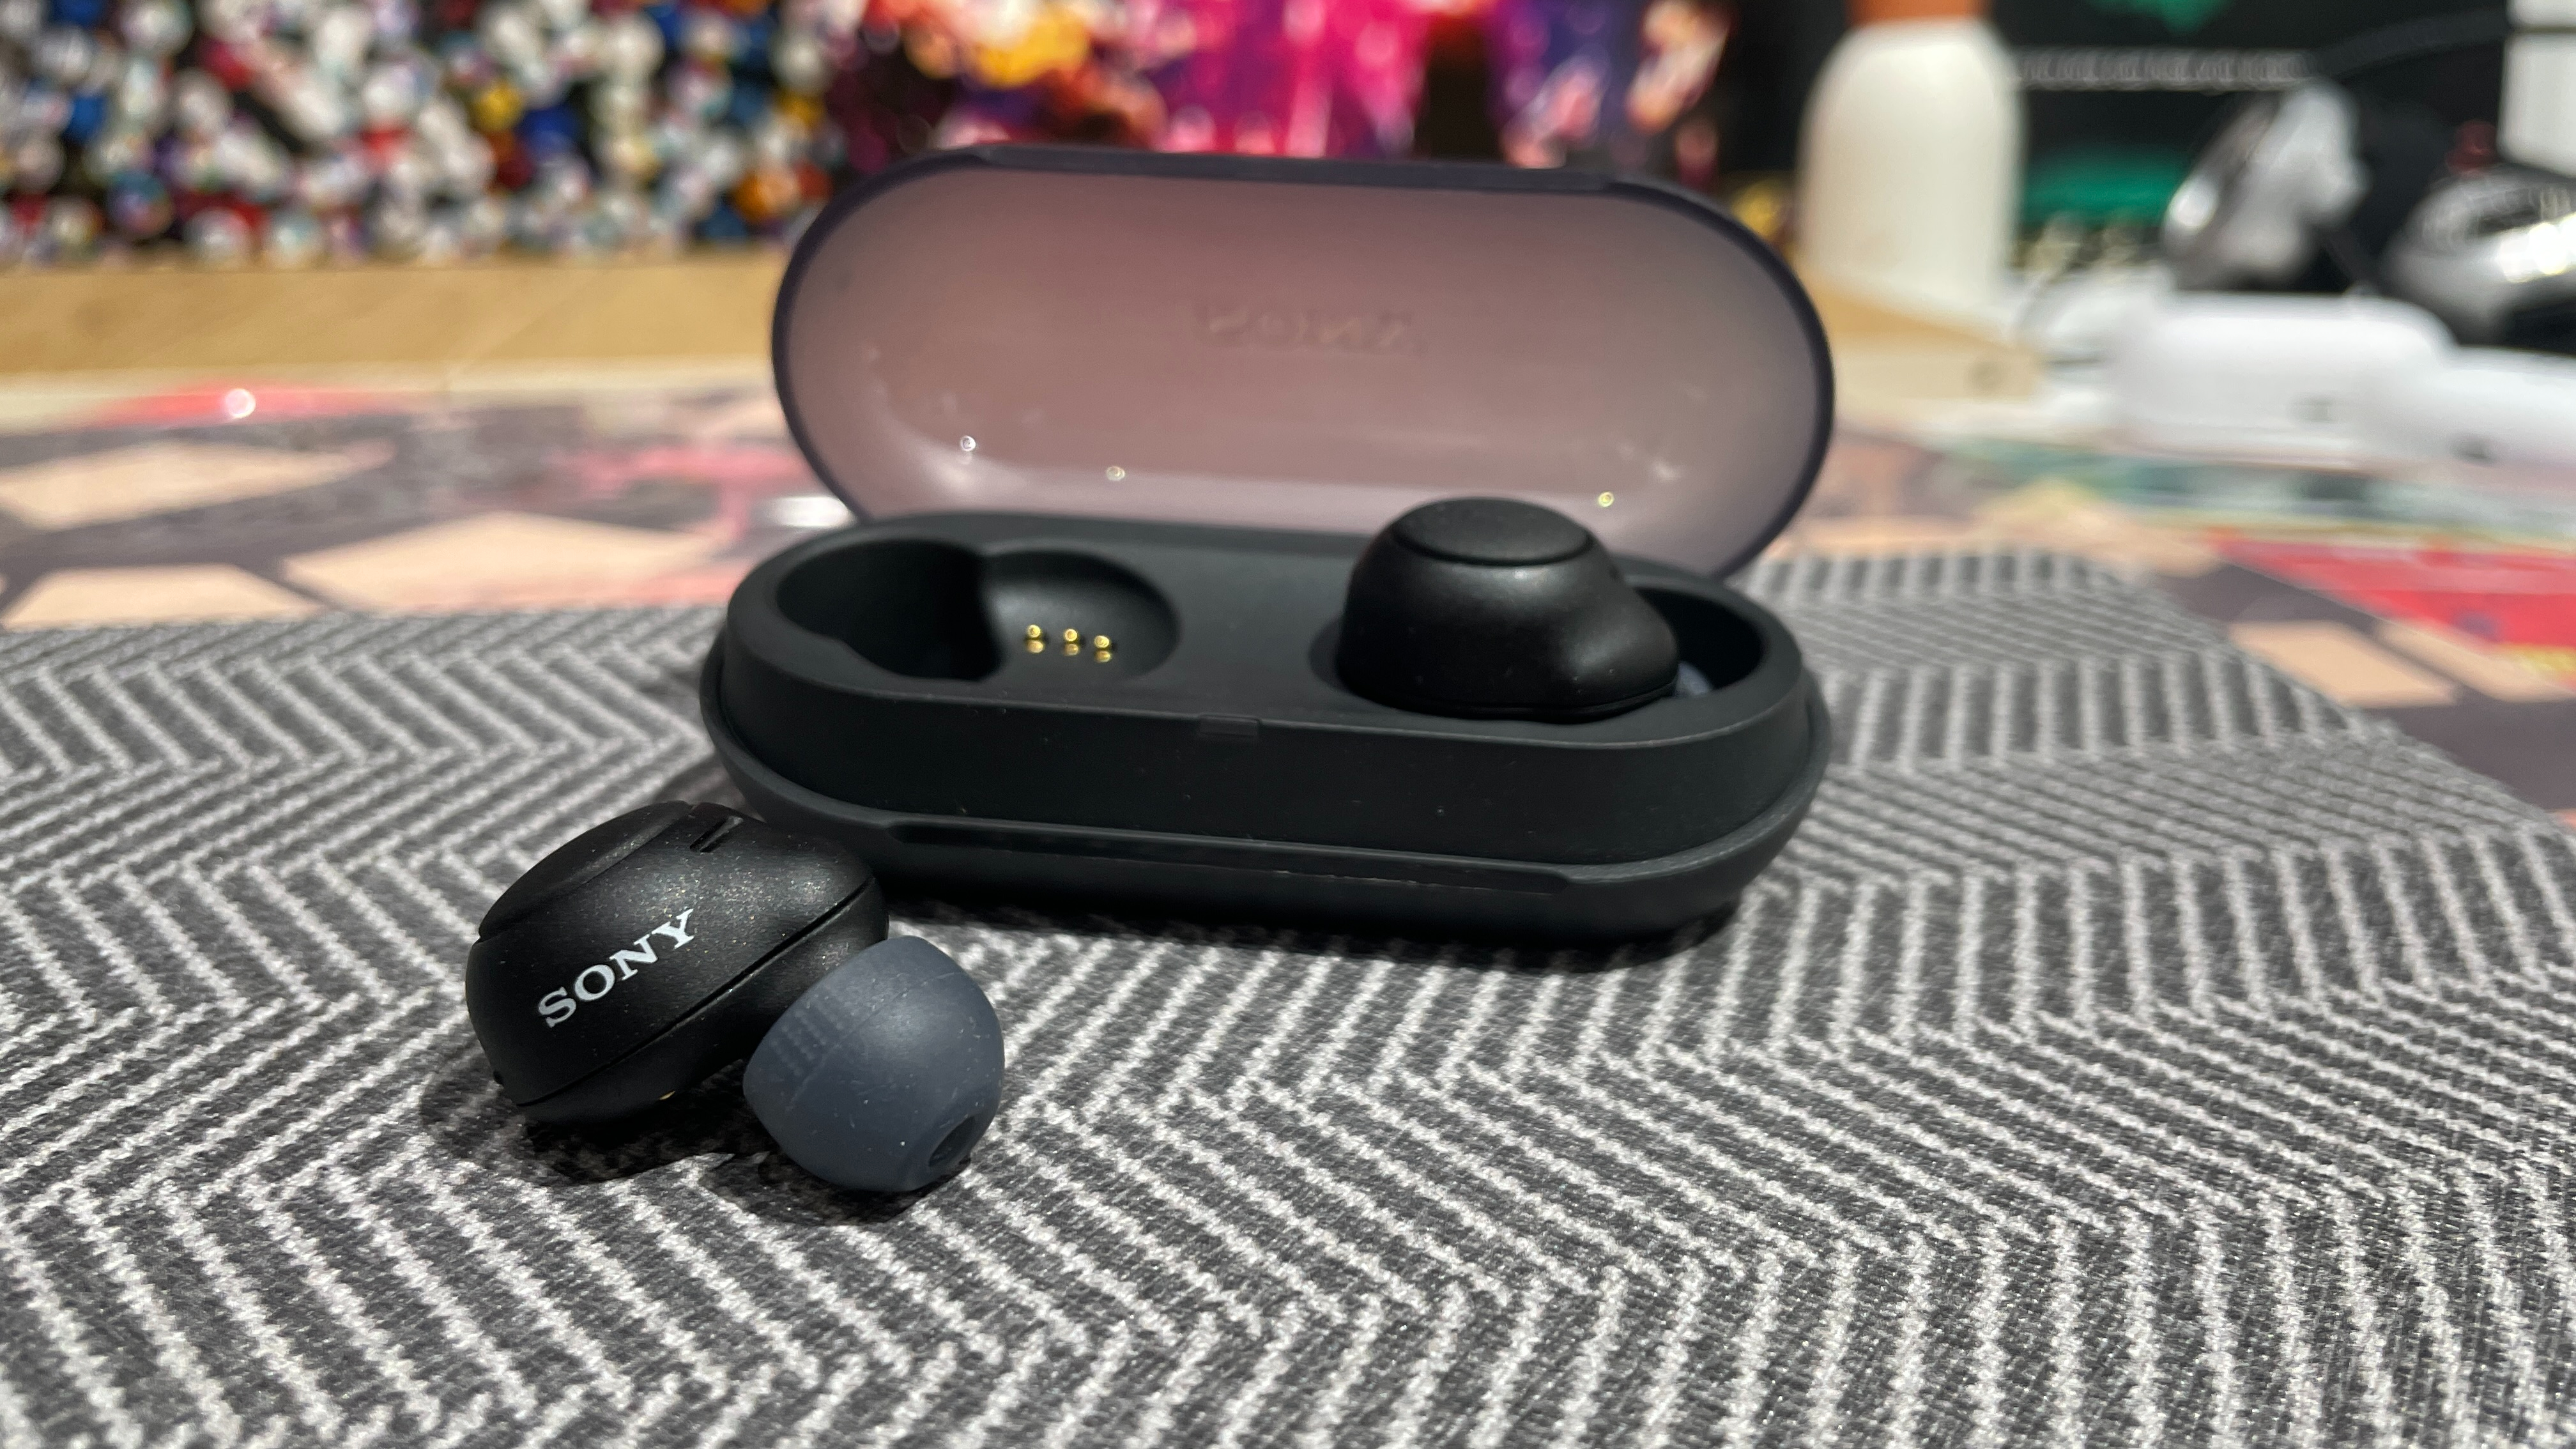  Sony WF-C700N Wireless Noise-Canceling Earbuds - Bluetooth  Hi-Fi Earphones with 35-Hour Battery, Water-Resistant Design, Touch  Controls for Calls and Music - Premium Audio Experience, Black : Electronics